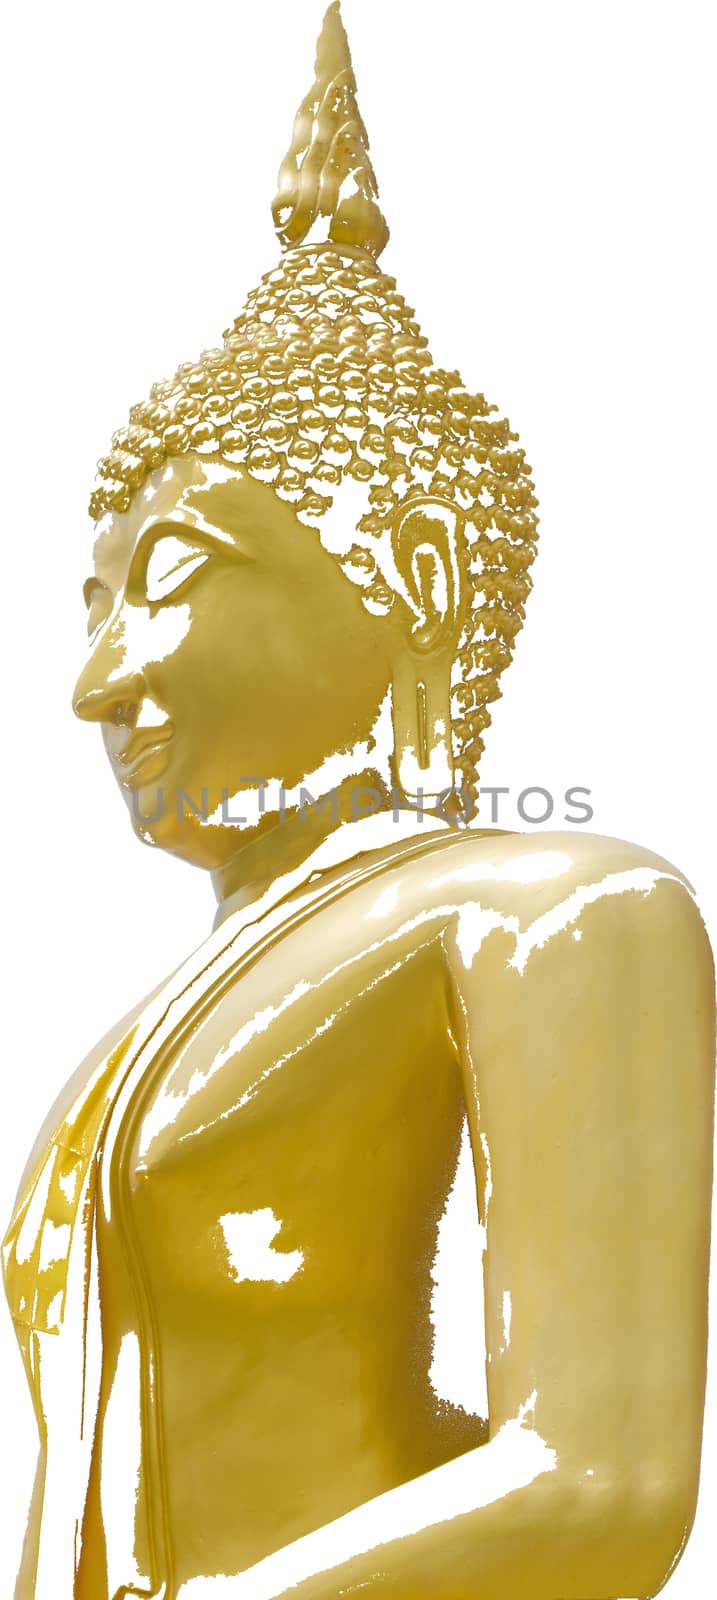 A image or Statue of Buddha that Seated in The attitude of 
meditation and Sitting cross-legs with one top of another.